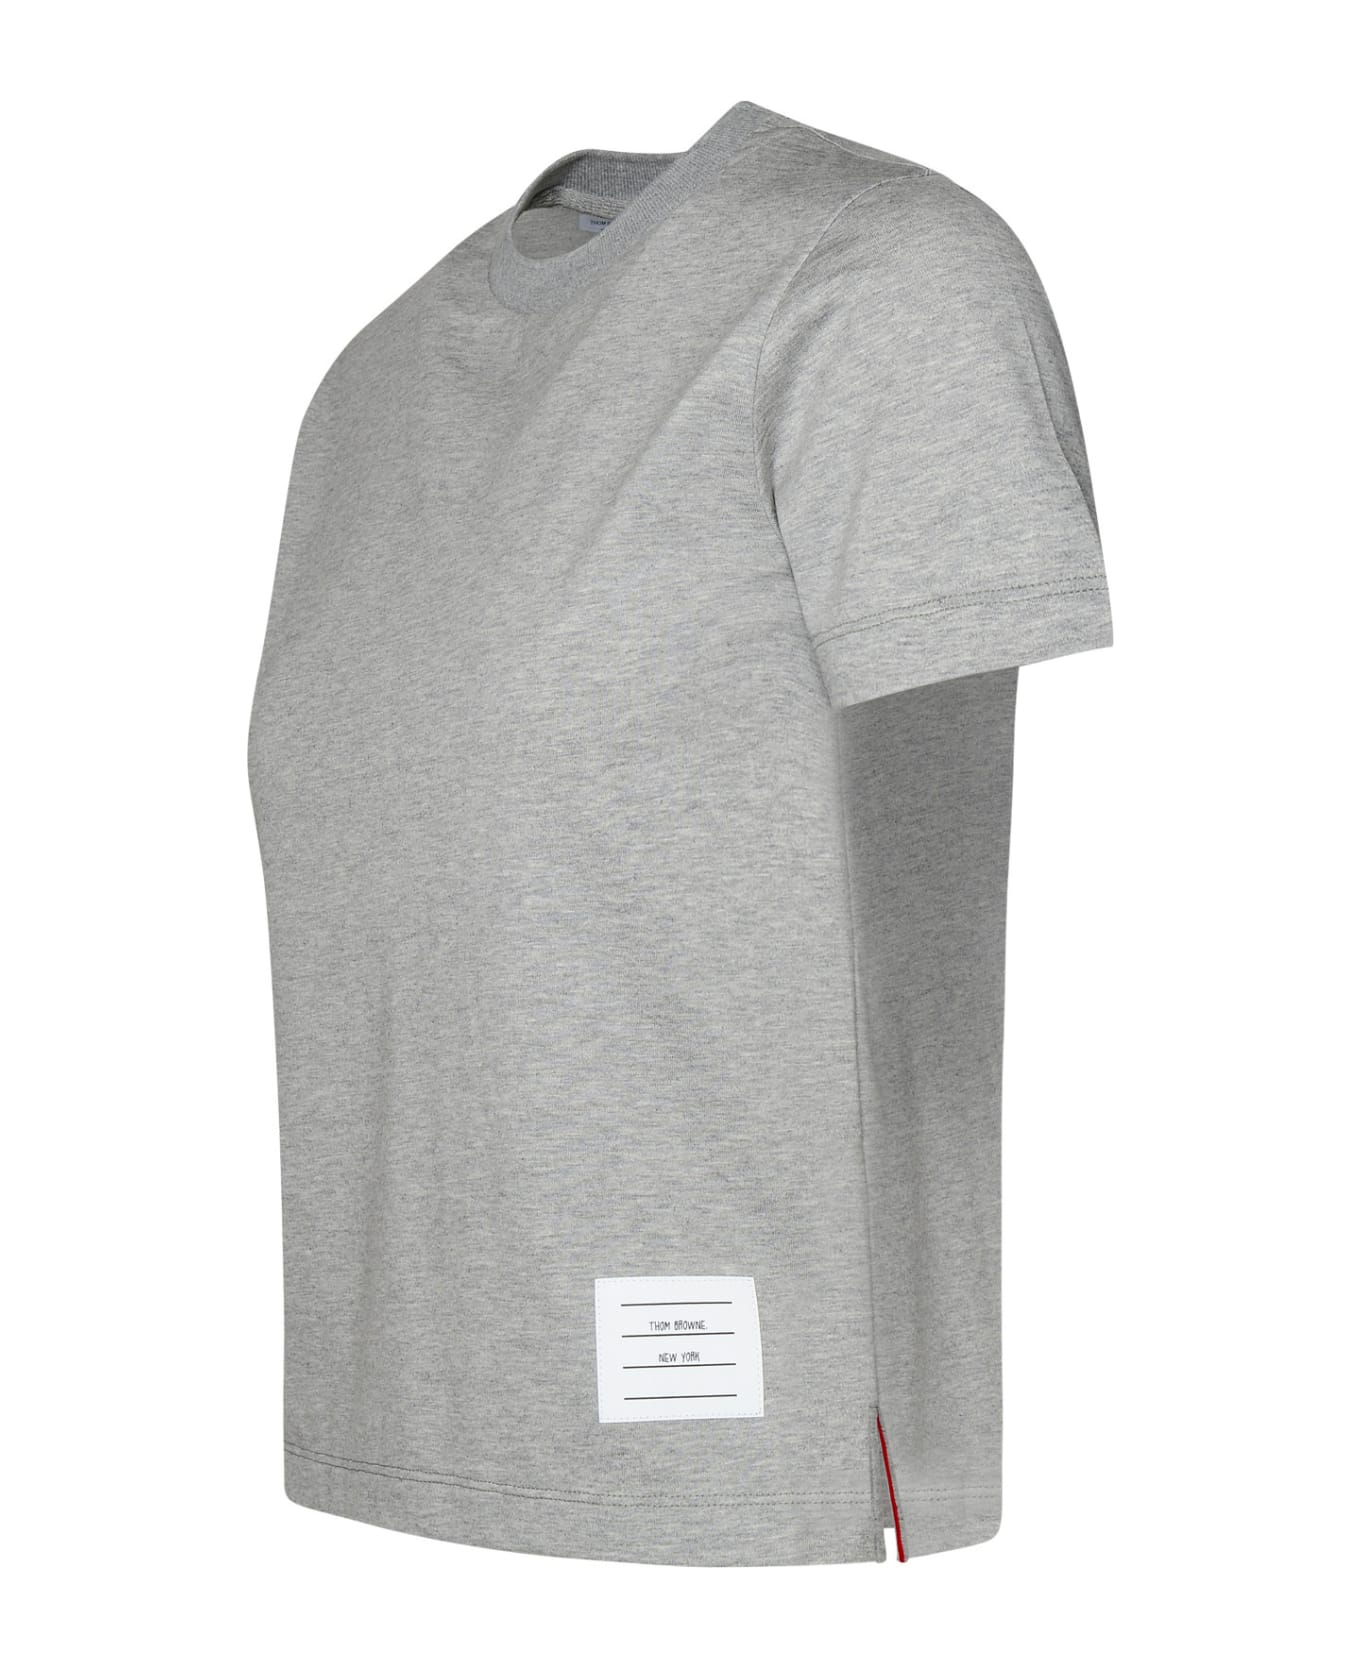 Thom Browne 'relaxed' Grey Cotton T-shirt - LIGHT GREY